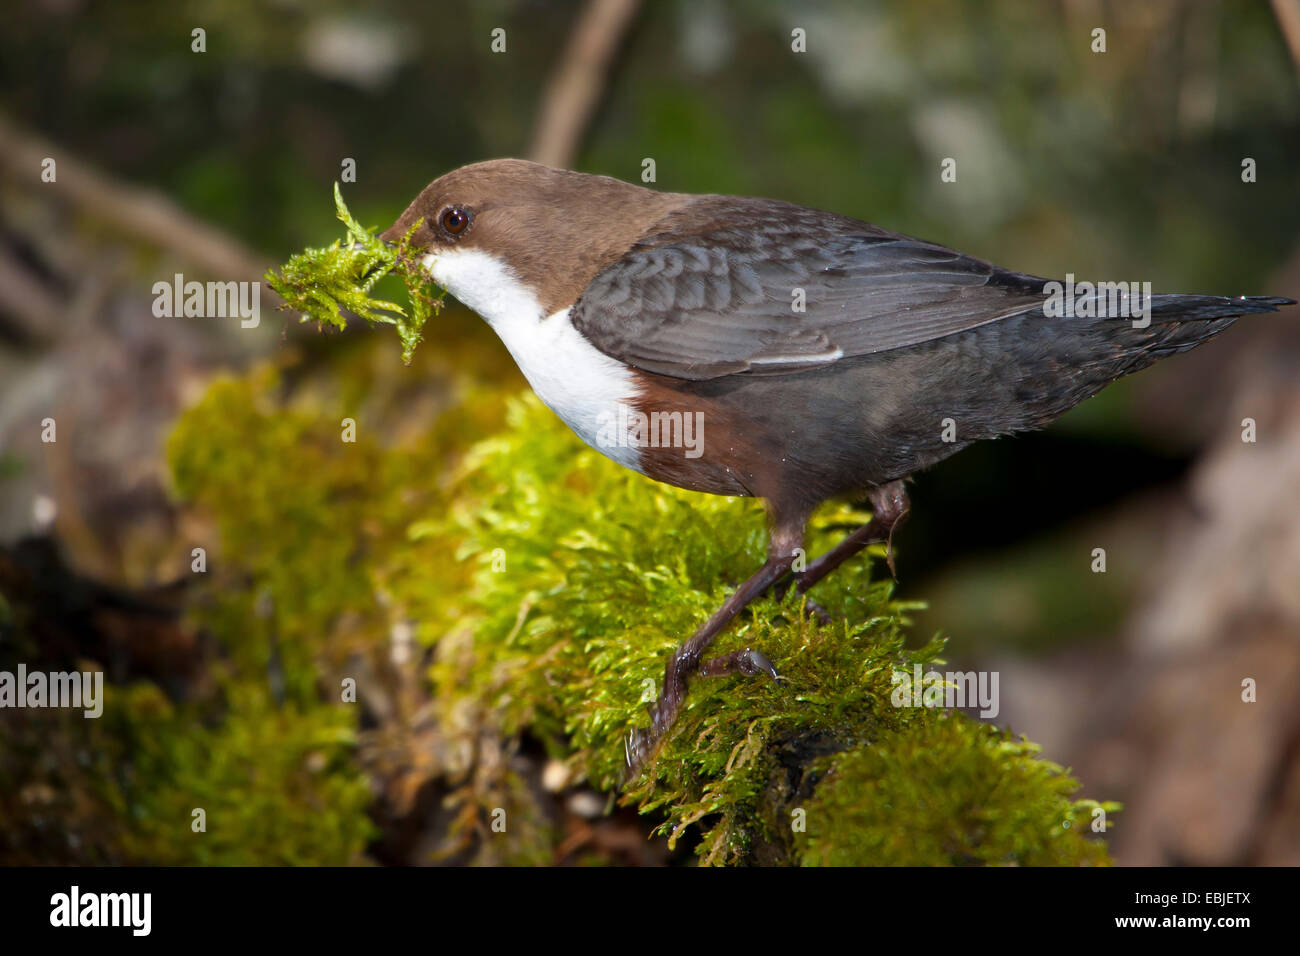 dipper (Cinclus cinclus), sitting on a mossy branch with nesting material in its beak, Switzerland, Sankt Gallen Stock Photo